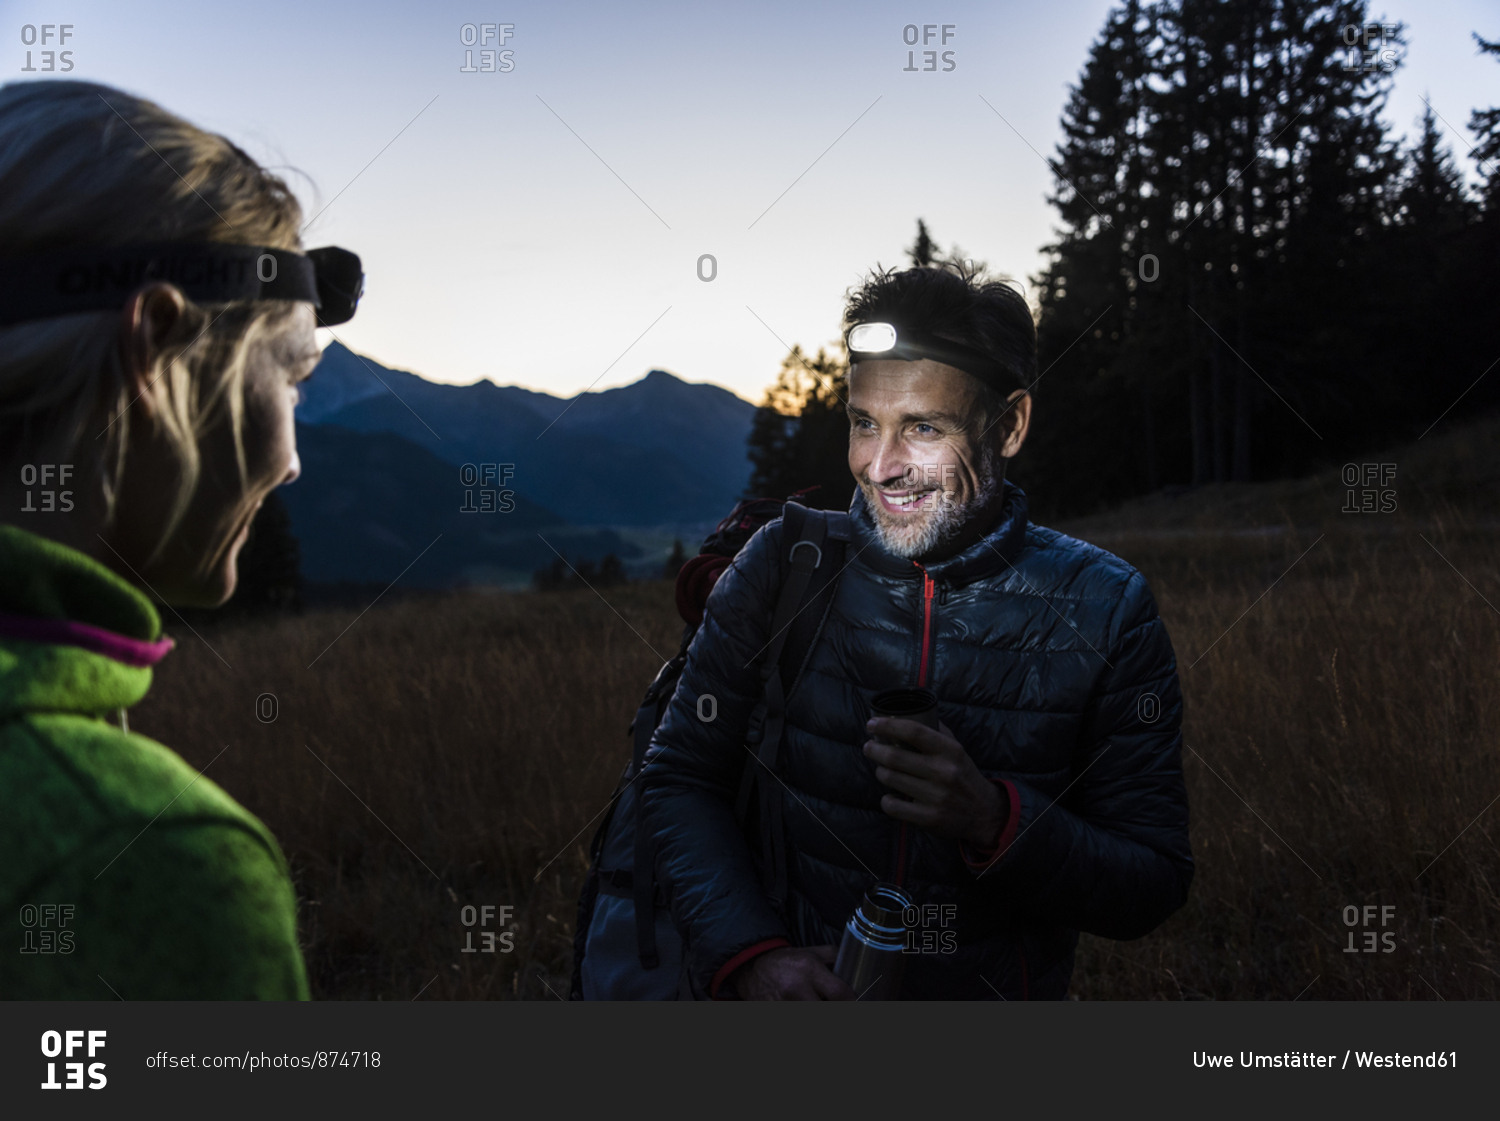 Couple hiking at night- wearing head lamps